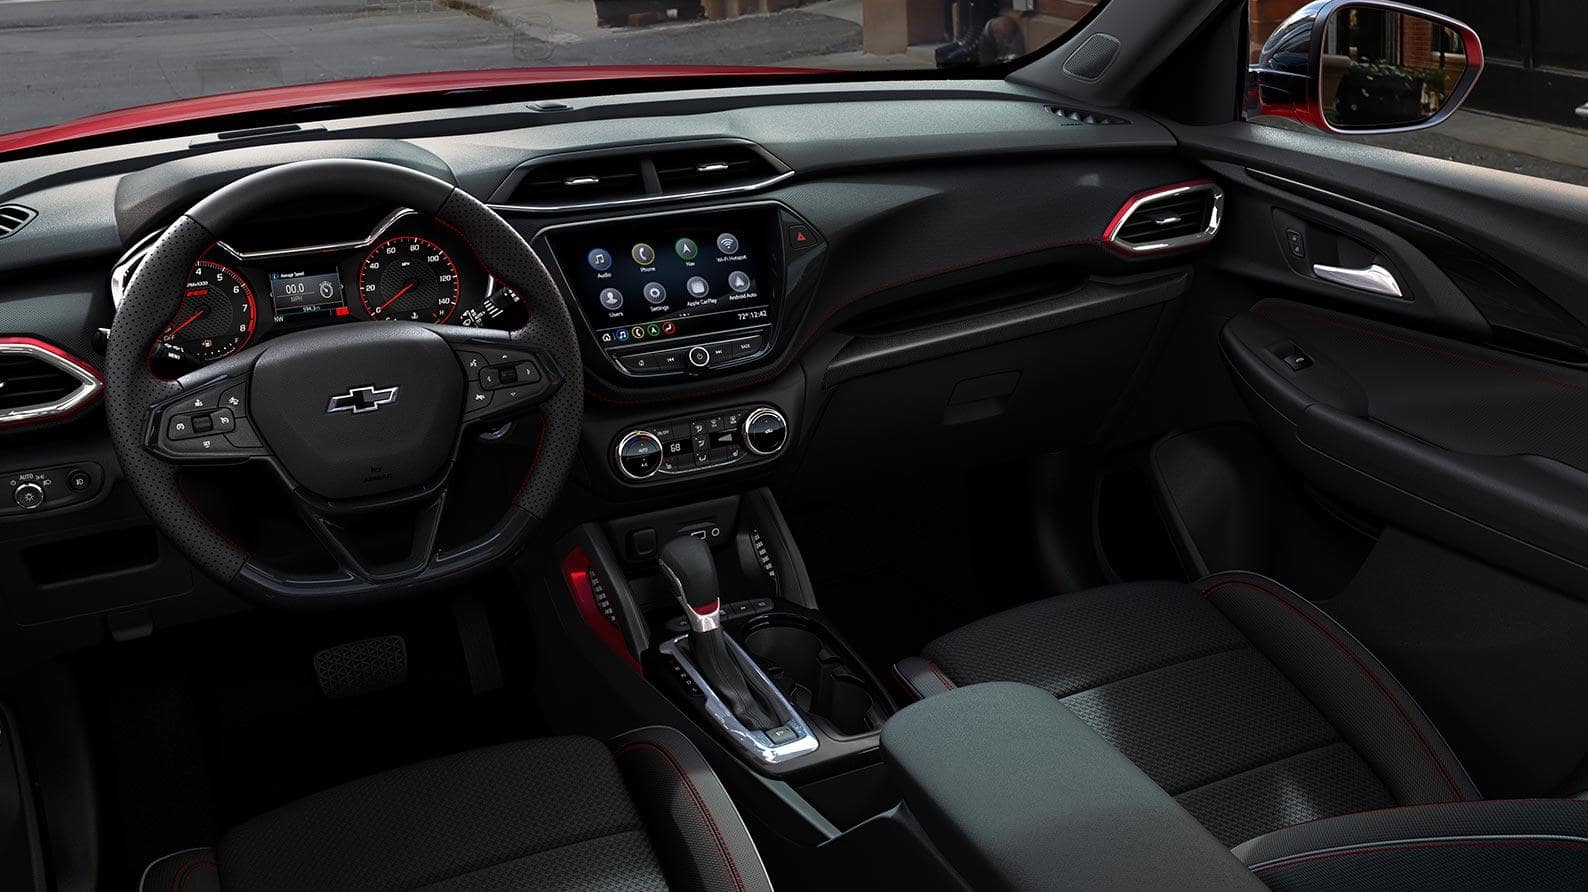 image of the dashboard of a Chevy Trailblazer